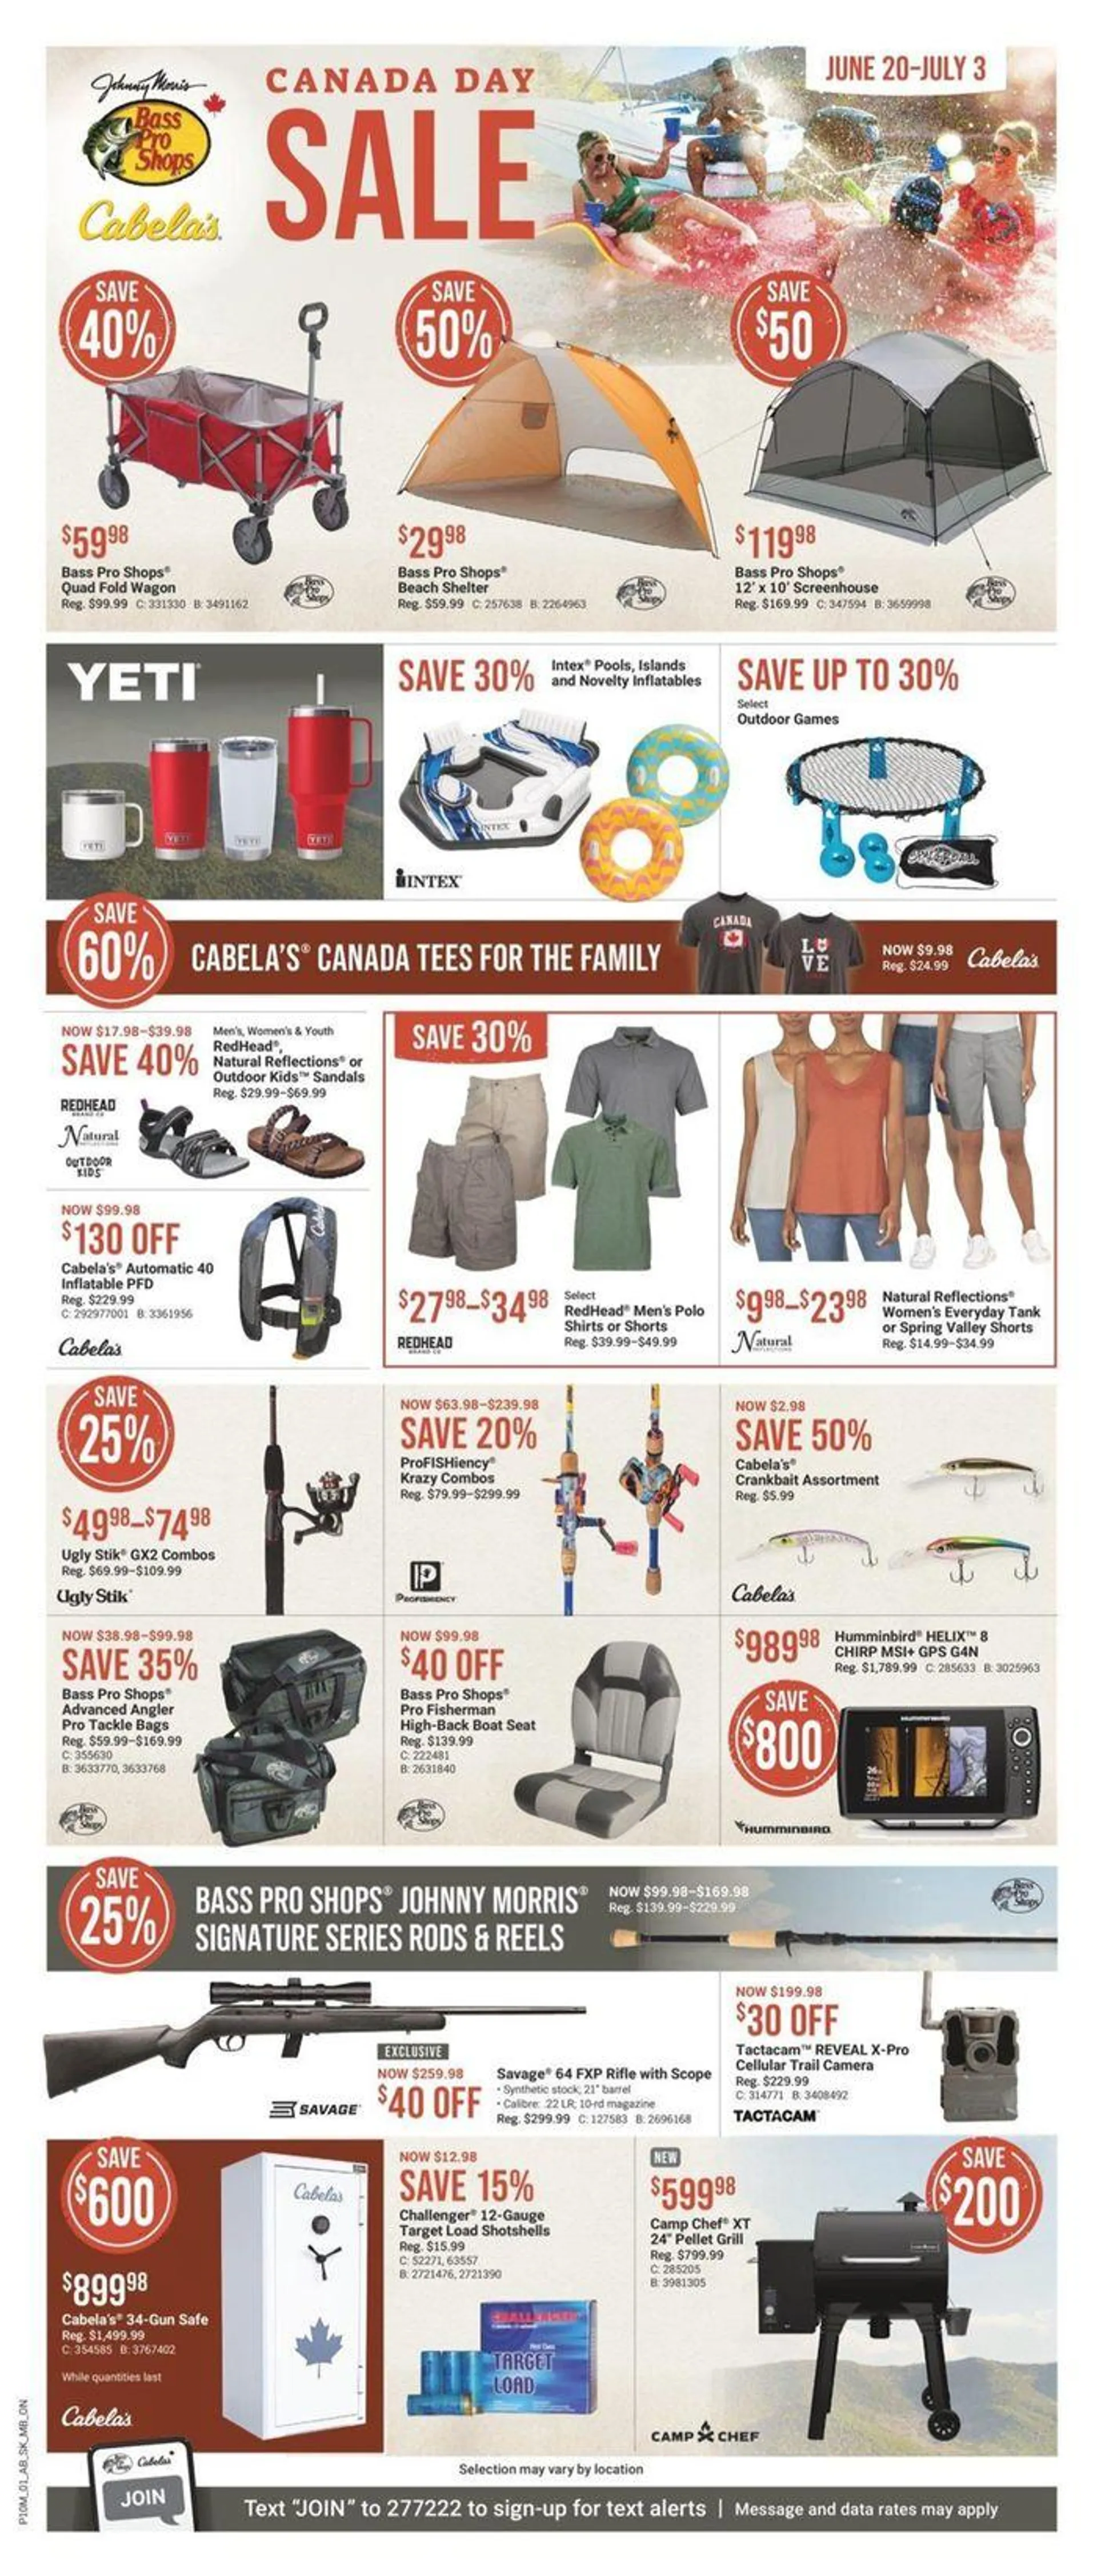 Canada Day Sale - 1